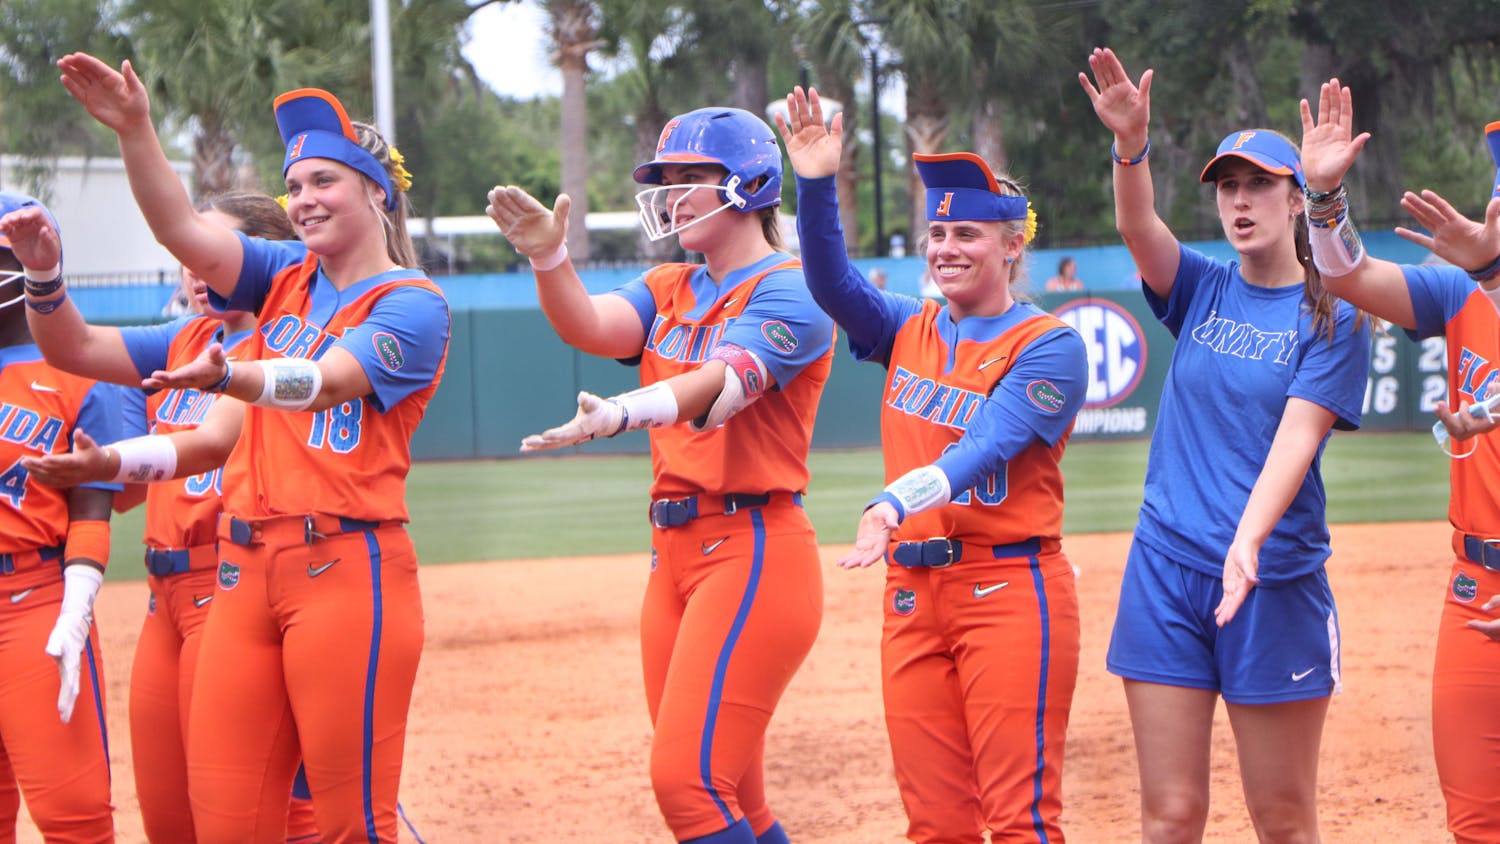 Members of the Florida softball team celebrate after a victory over USF May 21, 2021. Florida fell to UCLA Sunday, ending its season.